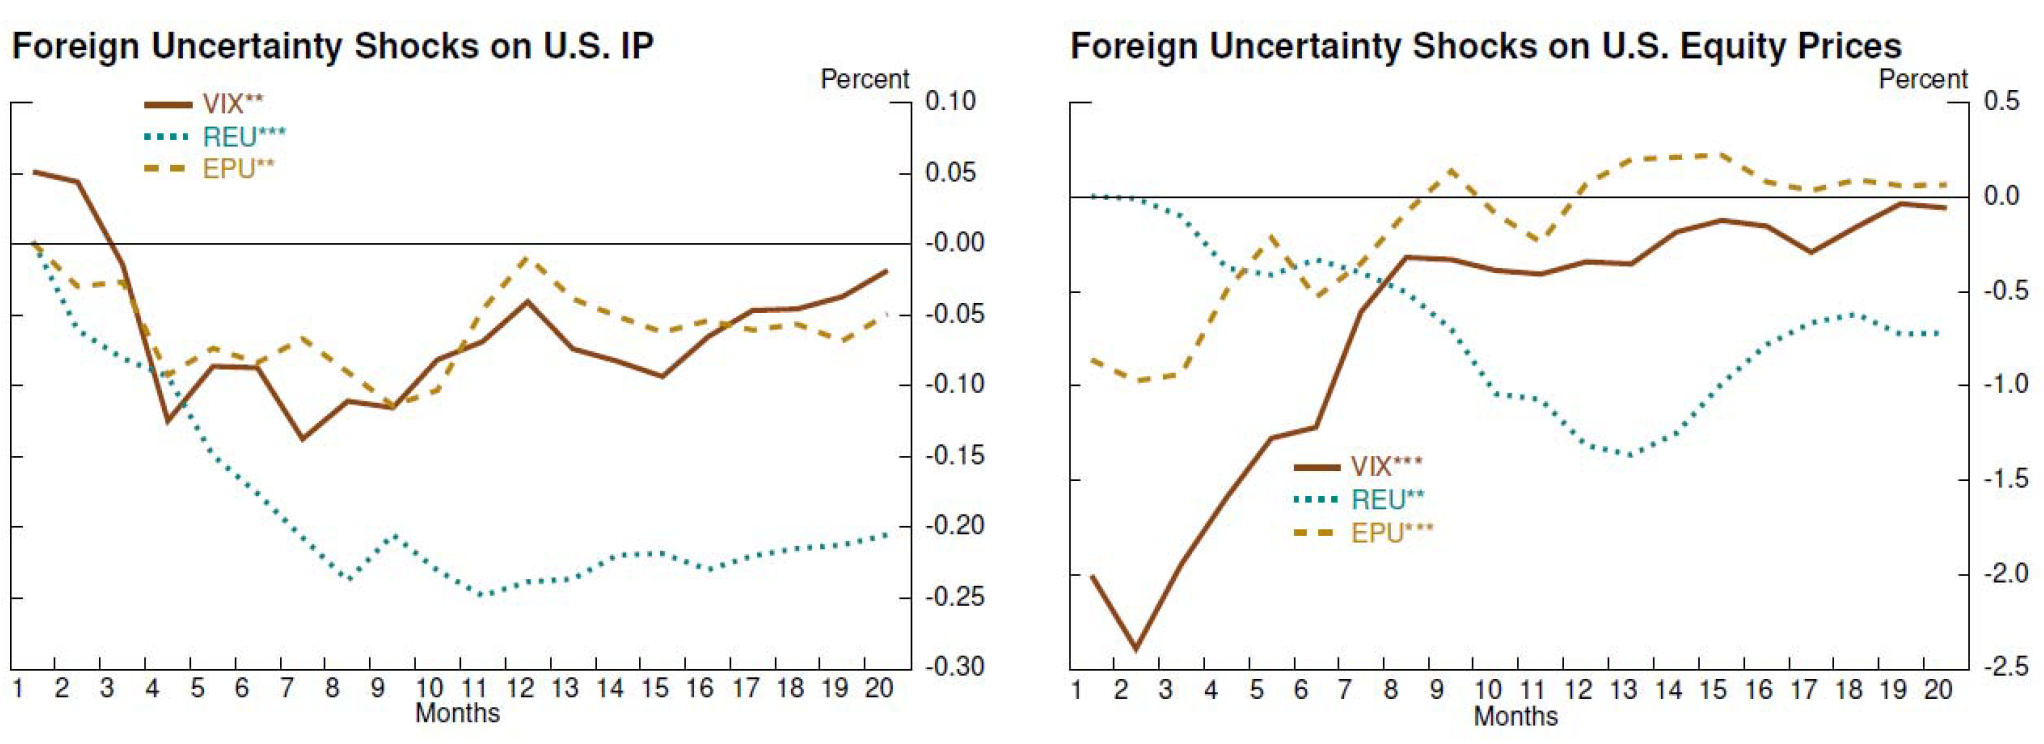 Figure 4. Impact of Foreign Uncertainty. See accessible link for data description.